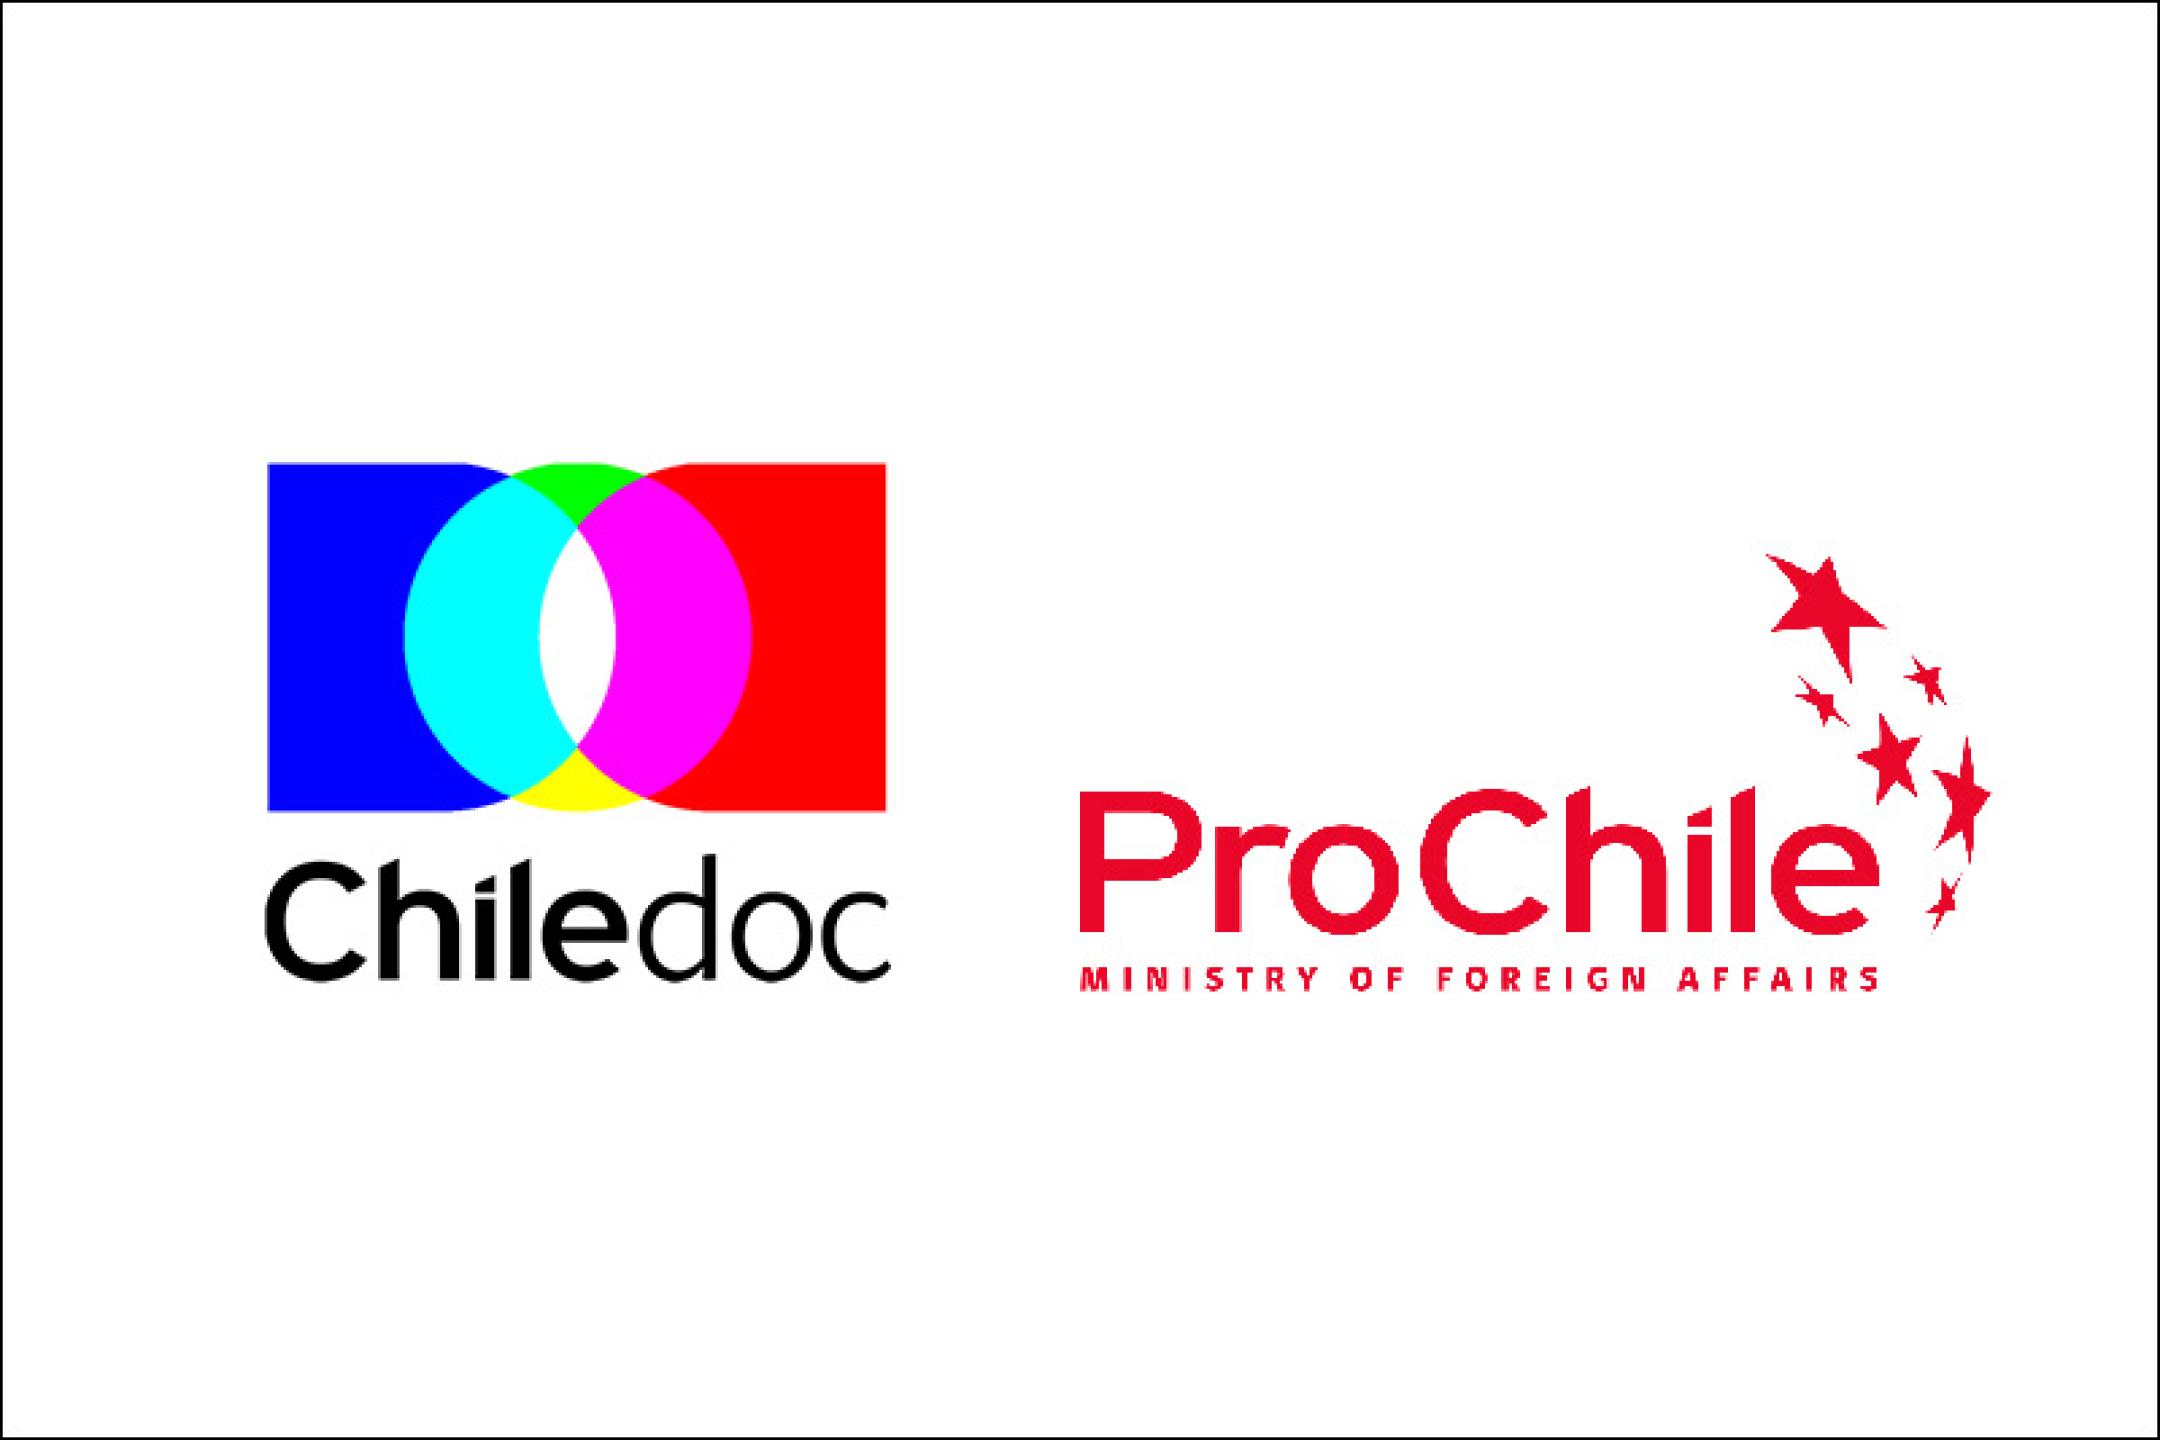 The two logos of Chiledoc and ProChile 